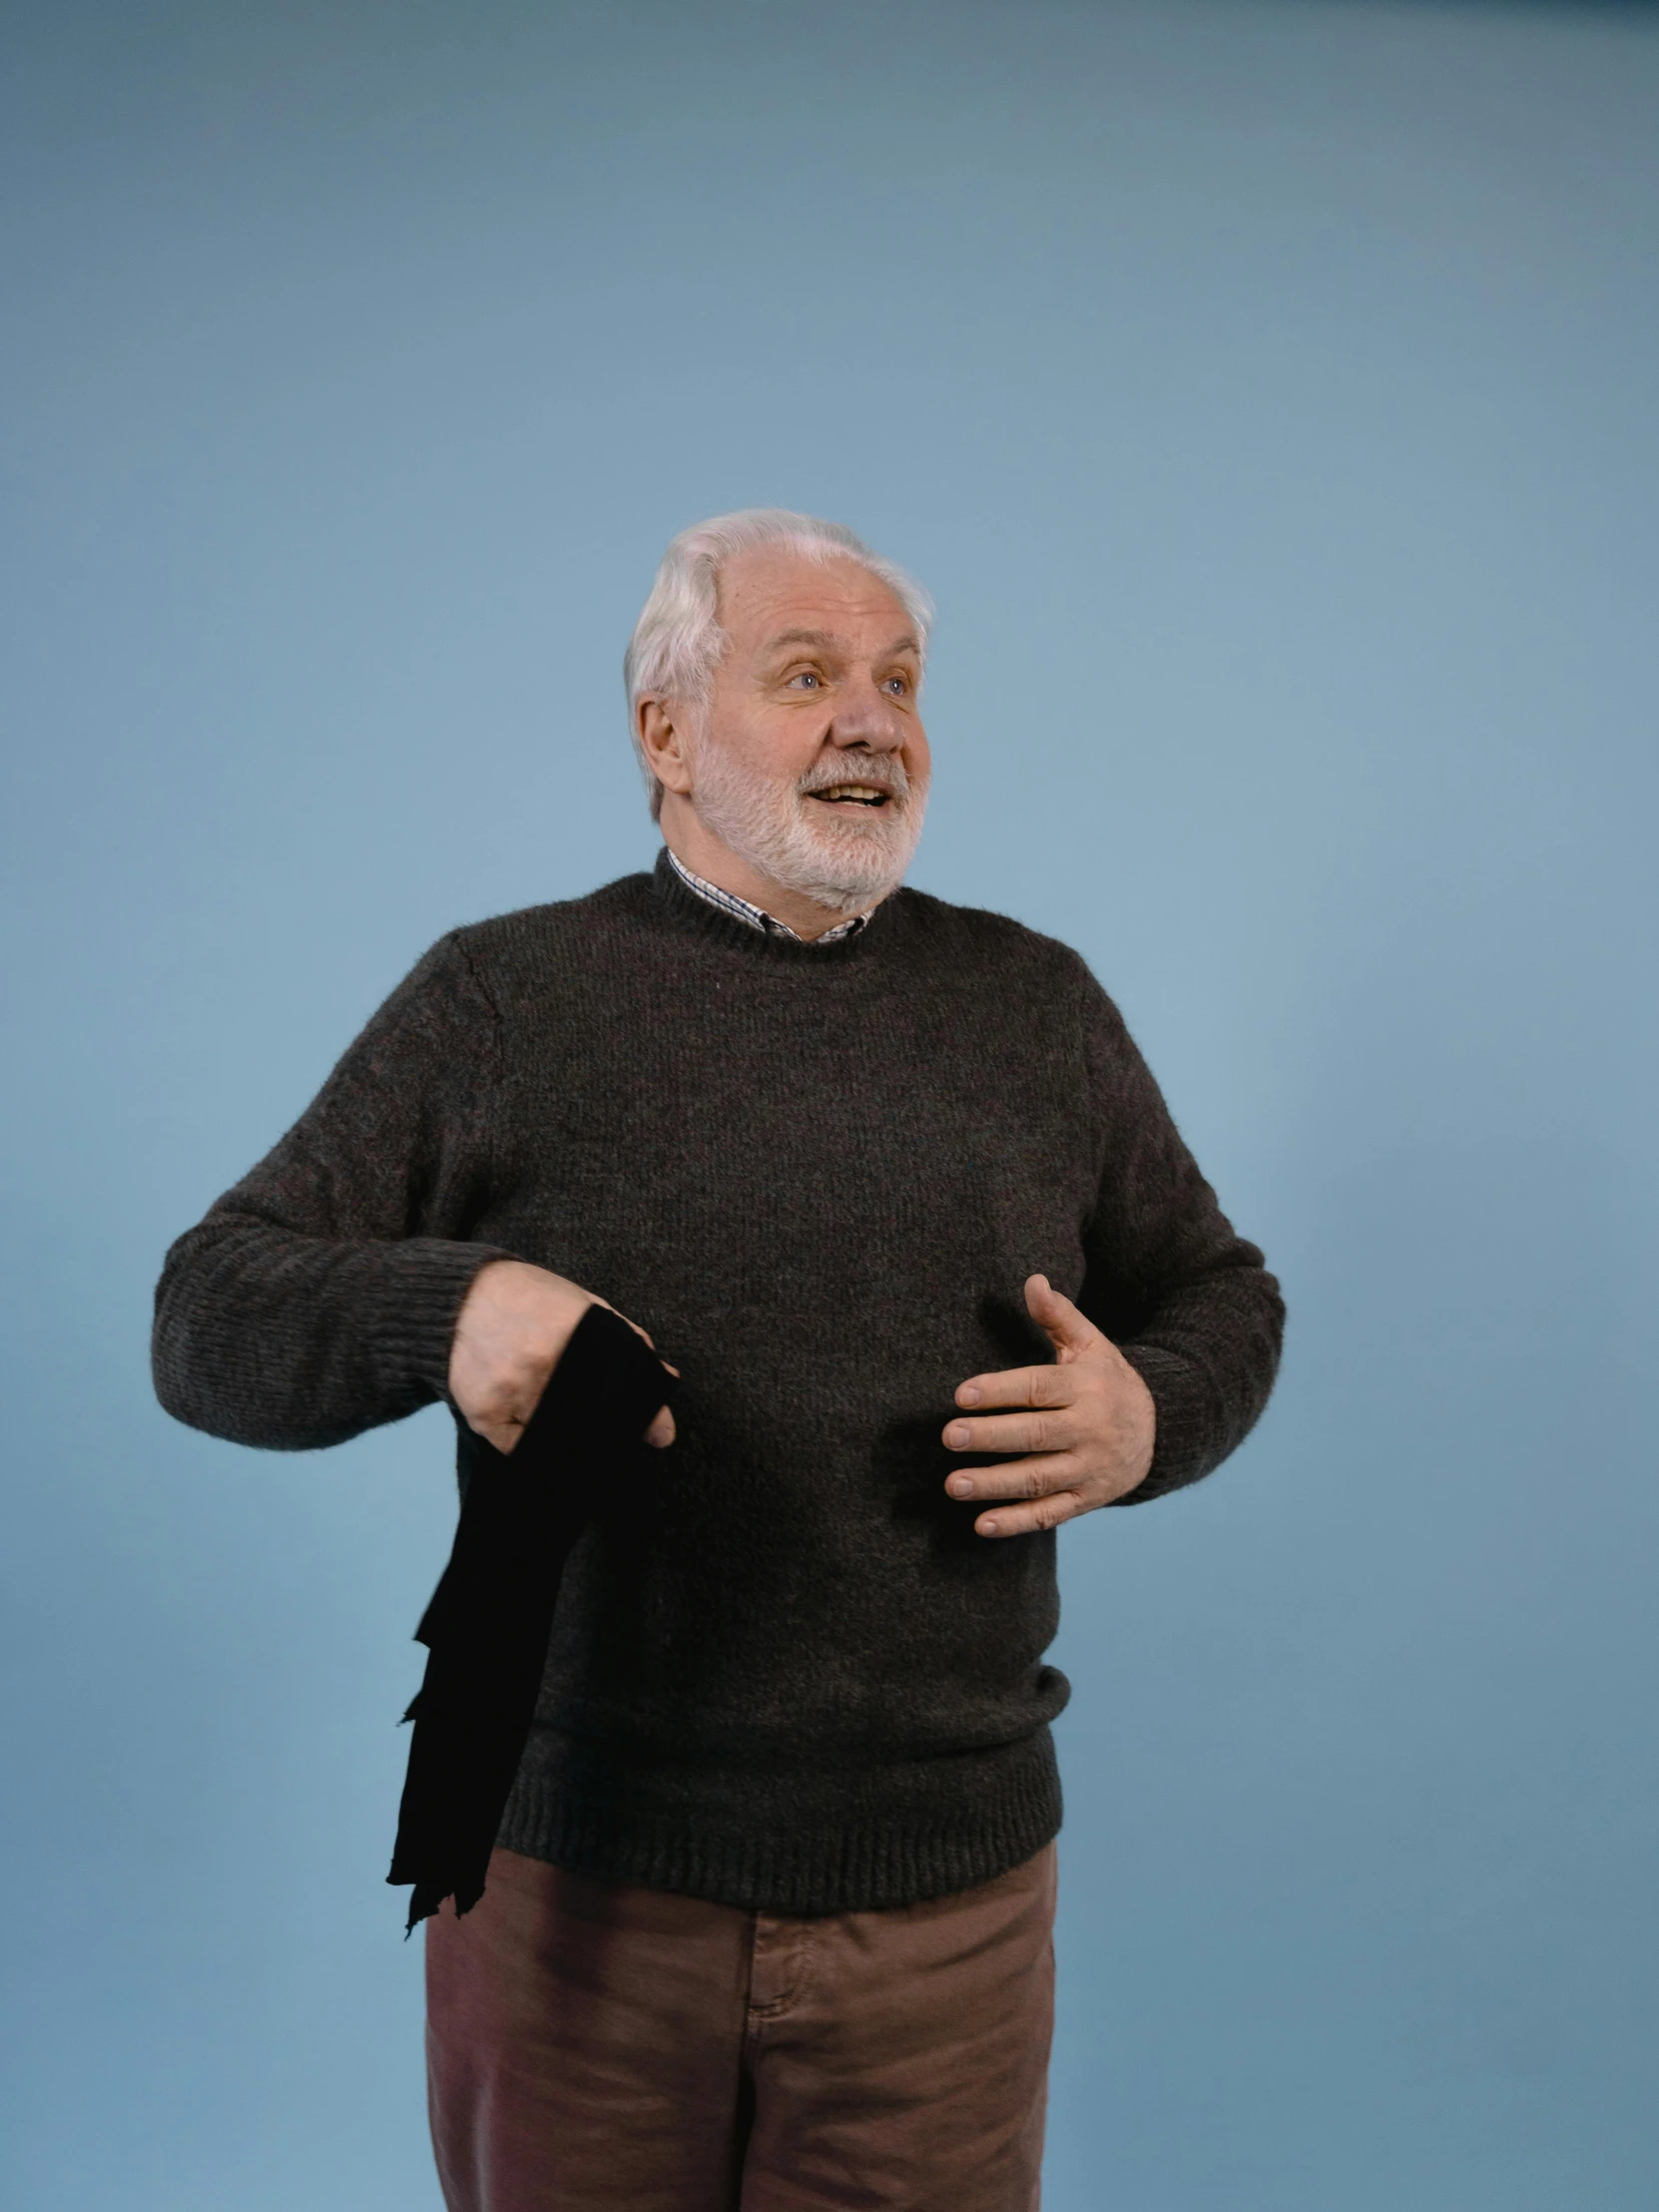 a man standing in front of a blue background, of an old man, wearing a sweater, complaints, standing with a black background